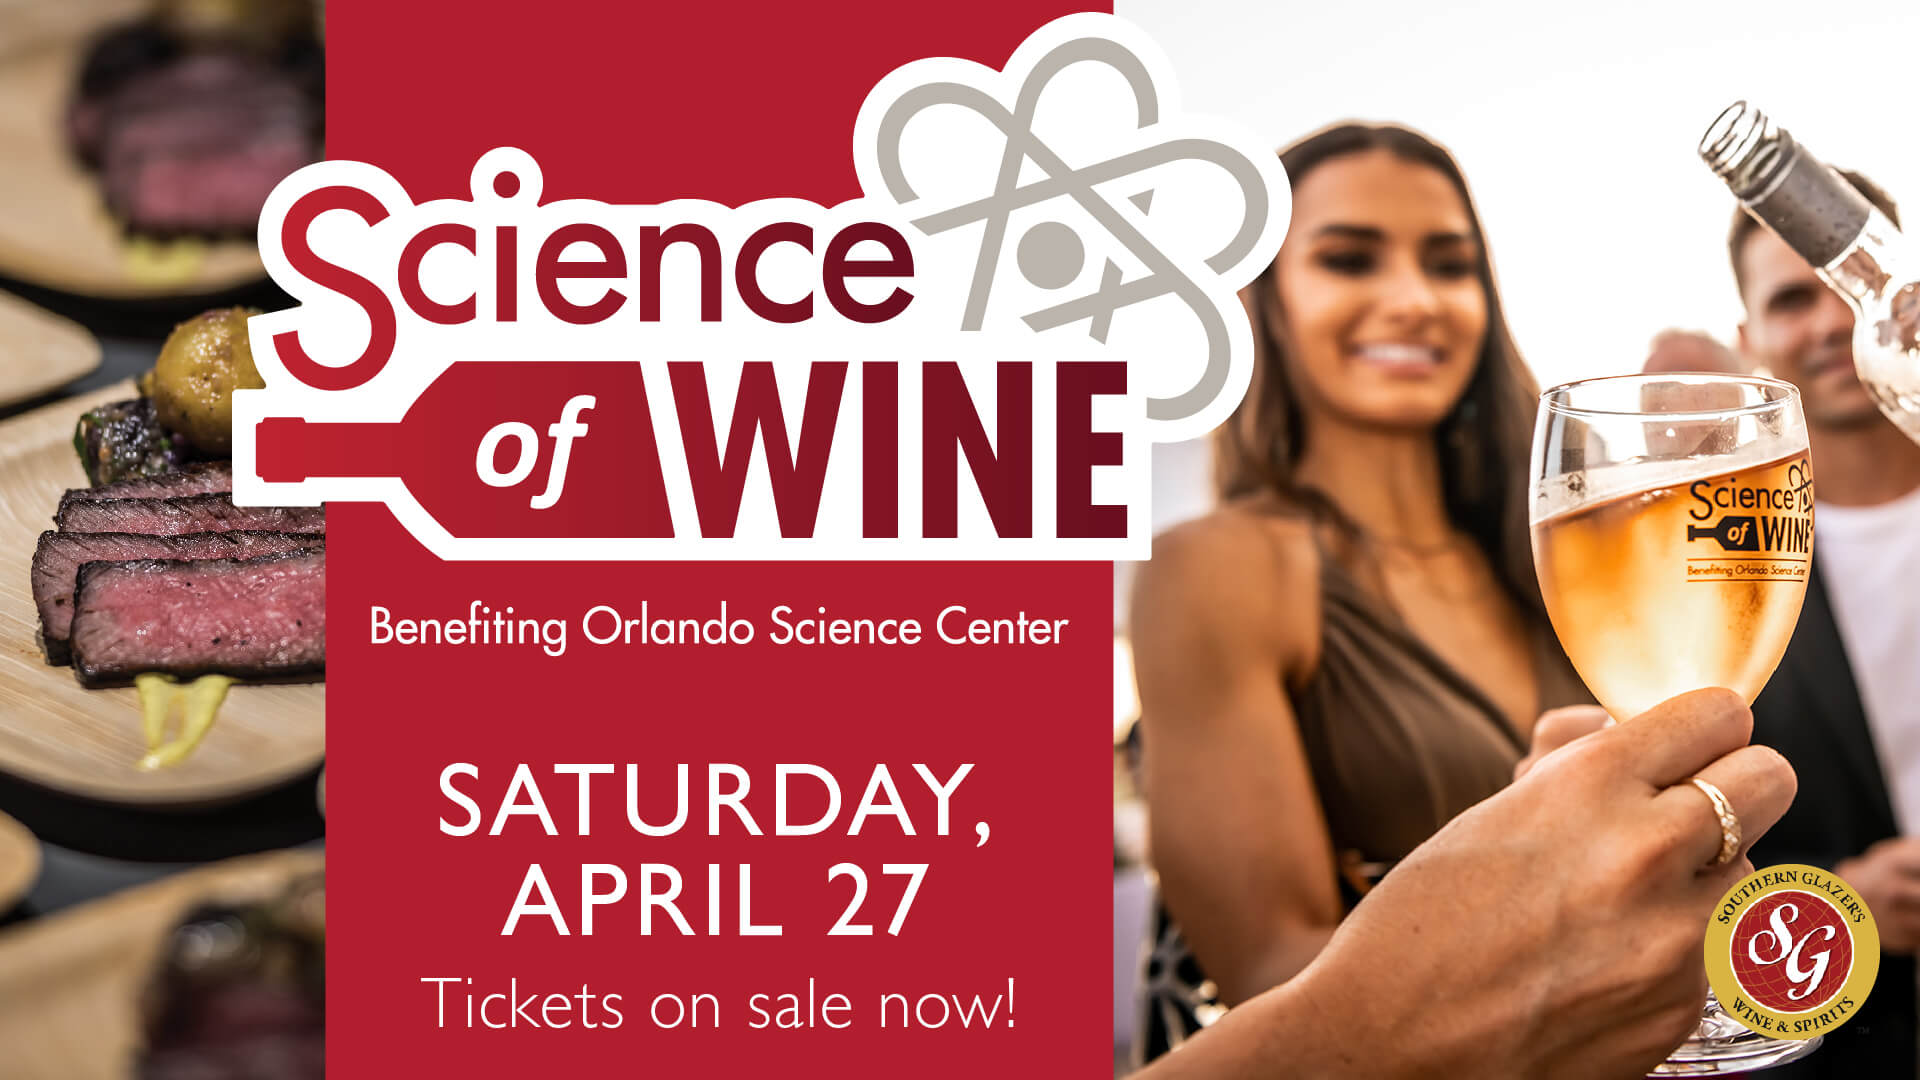 Science of Wine benefiting Orlando Science Center is Saturday, April 27, 2024. Information is presented next to a photo of a woman smiling and holding up a wine glass in a "cheers" motion.